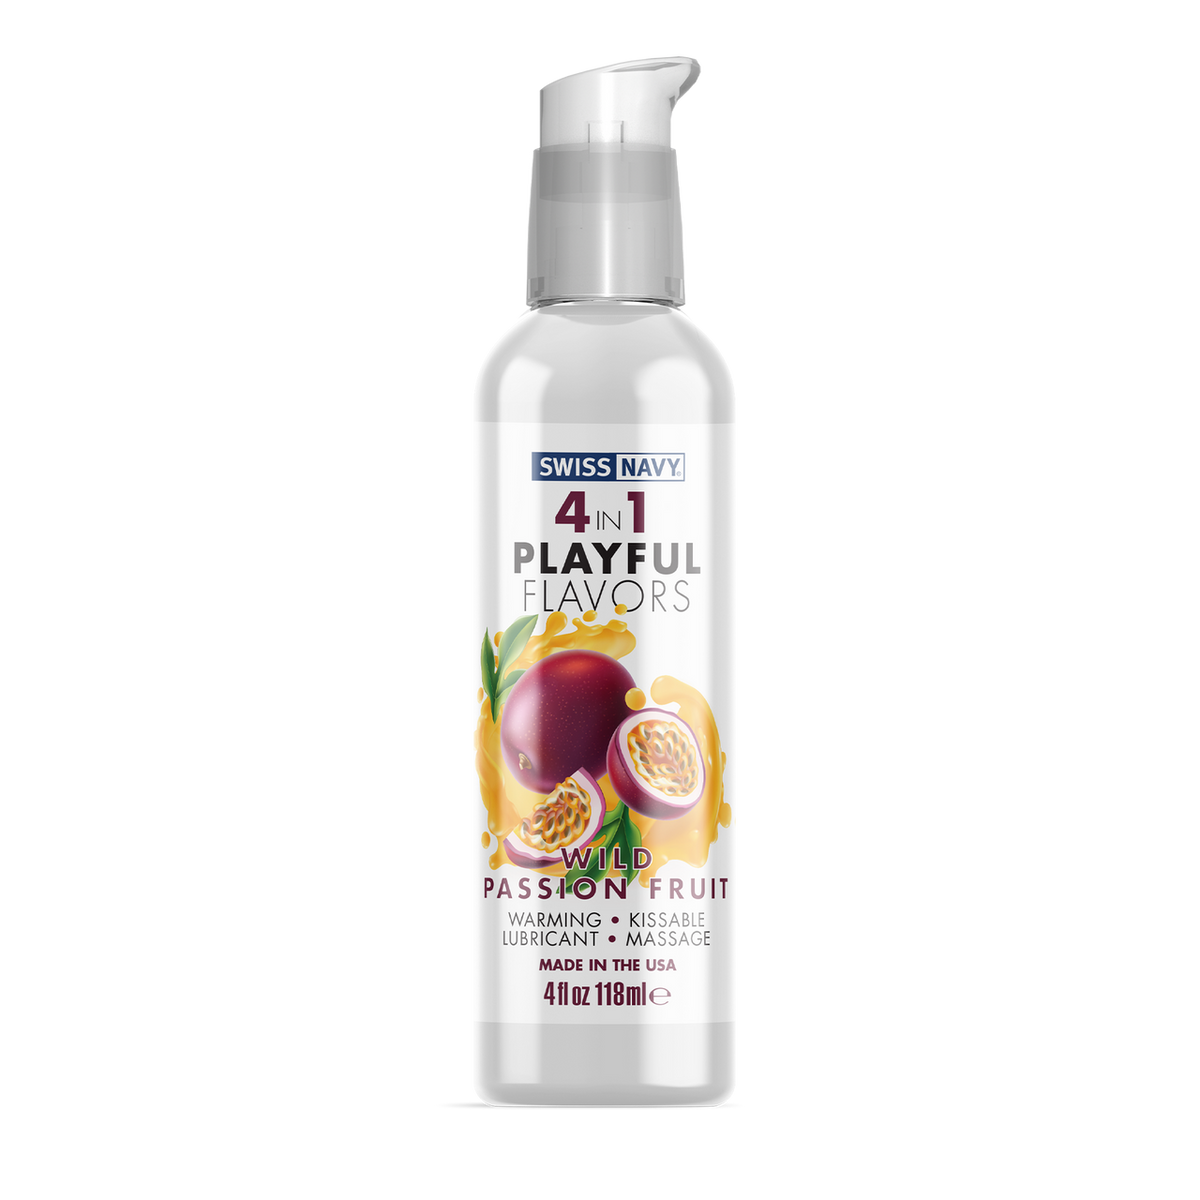 4 in 1 - Playful Flavors - Wild Passion Fruit